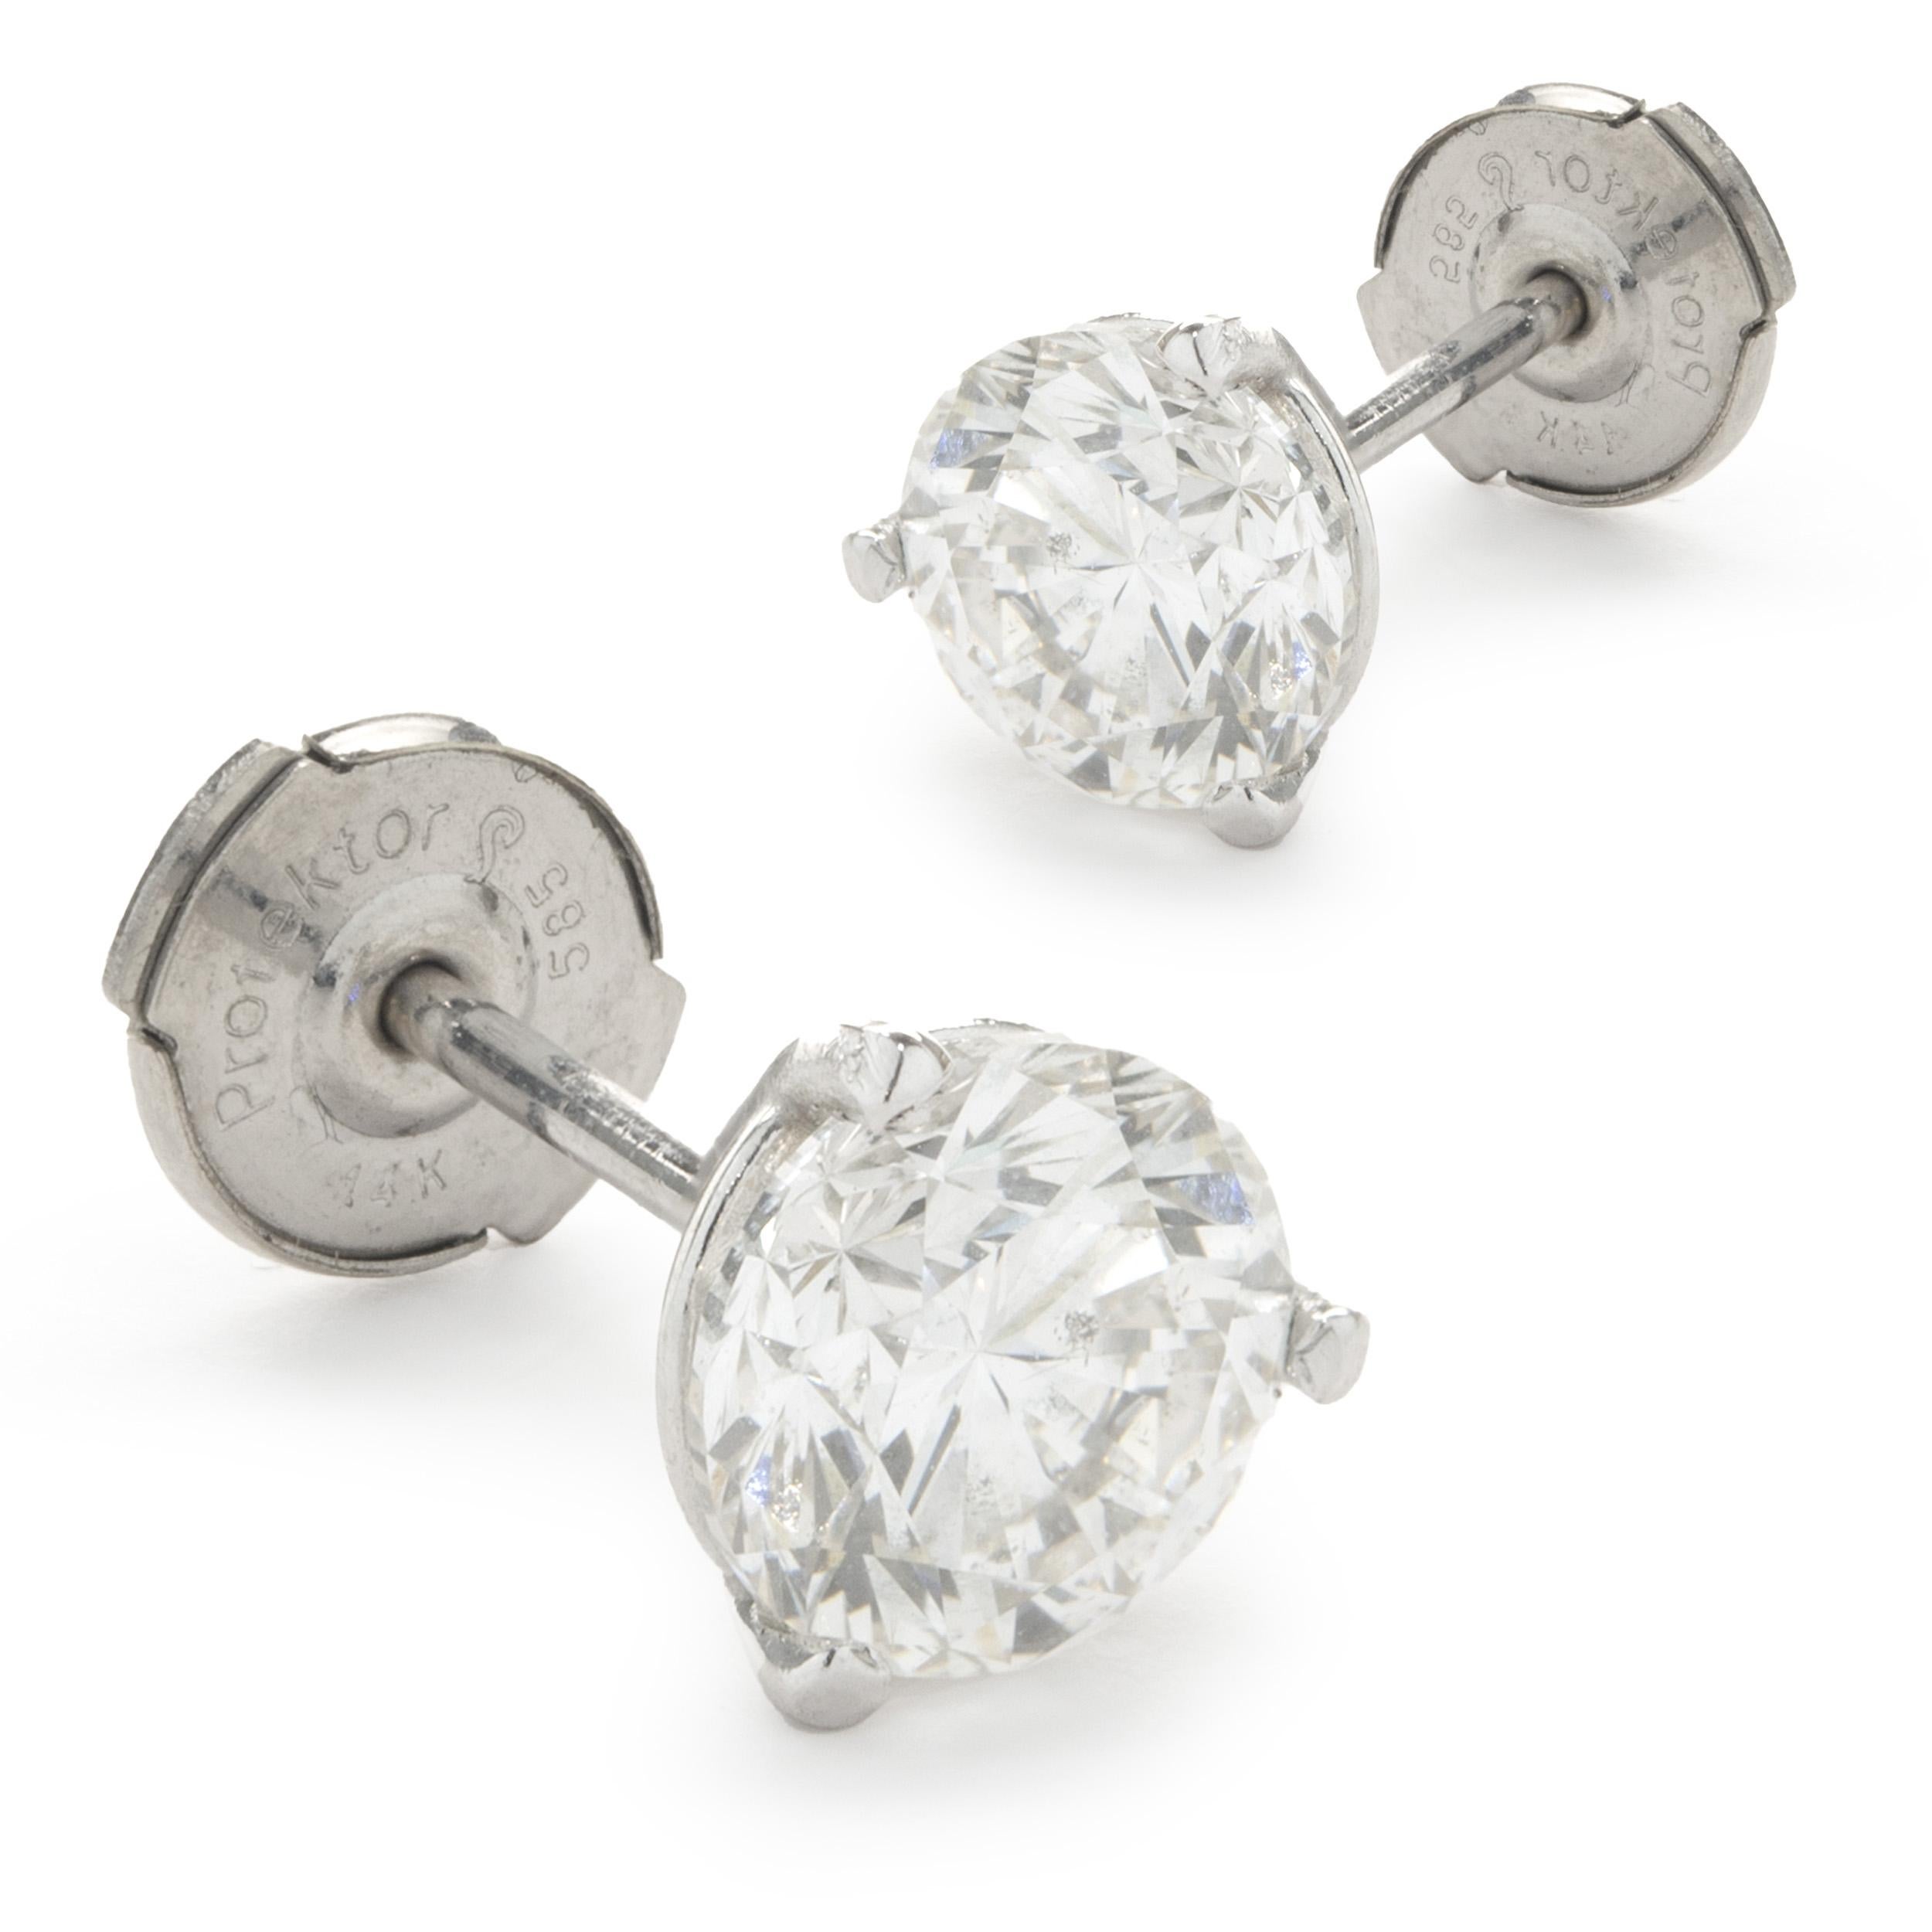 Material: 14k white gold
Diamonds: 2 round brilliant cut = 2.16cttw
Color: I / K
Clarity:SI2-I1
Dimensions: earrings measure approximately 6.40mm in diameter
Fastenings: post with lapousette backs
Weight: 1.55 grams